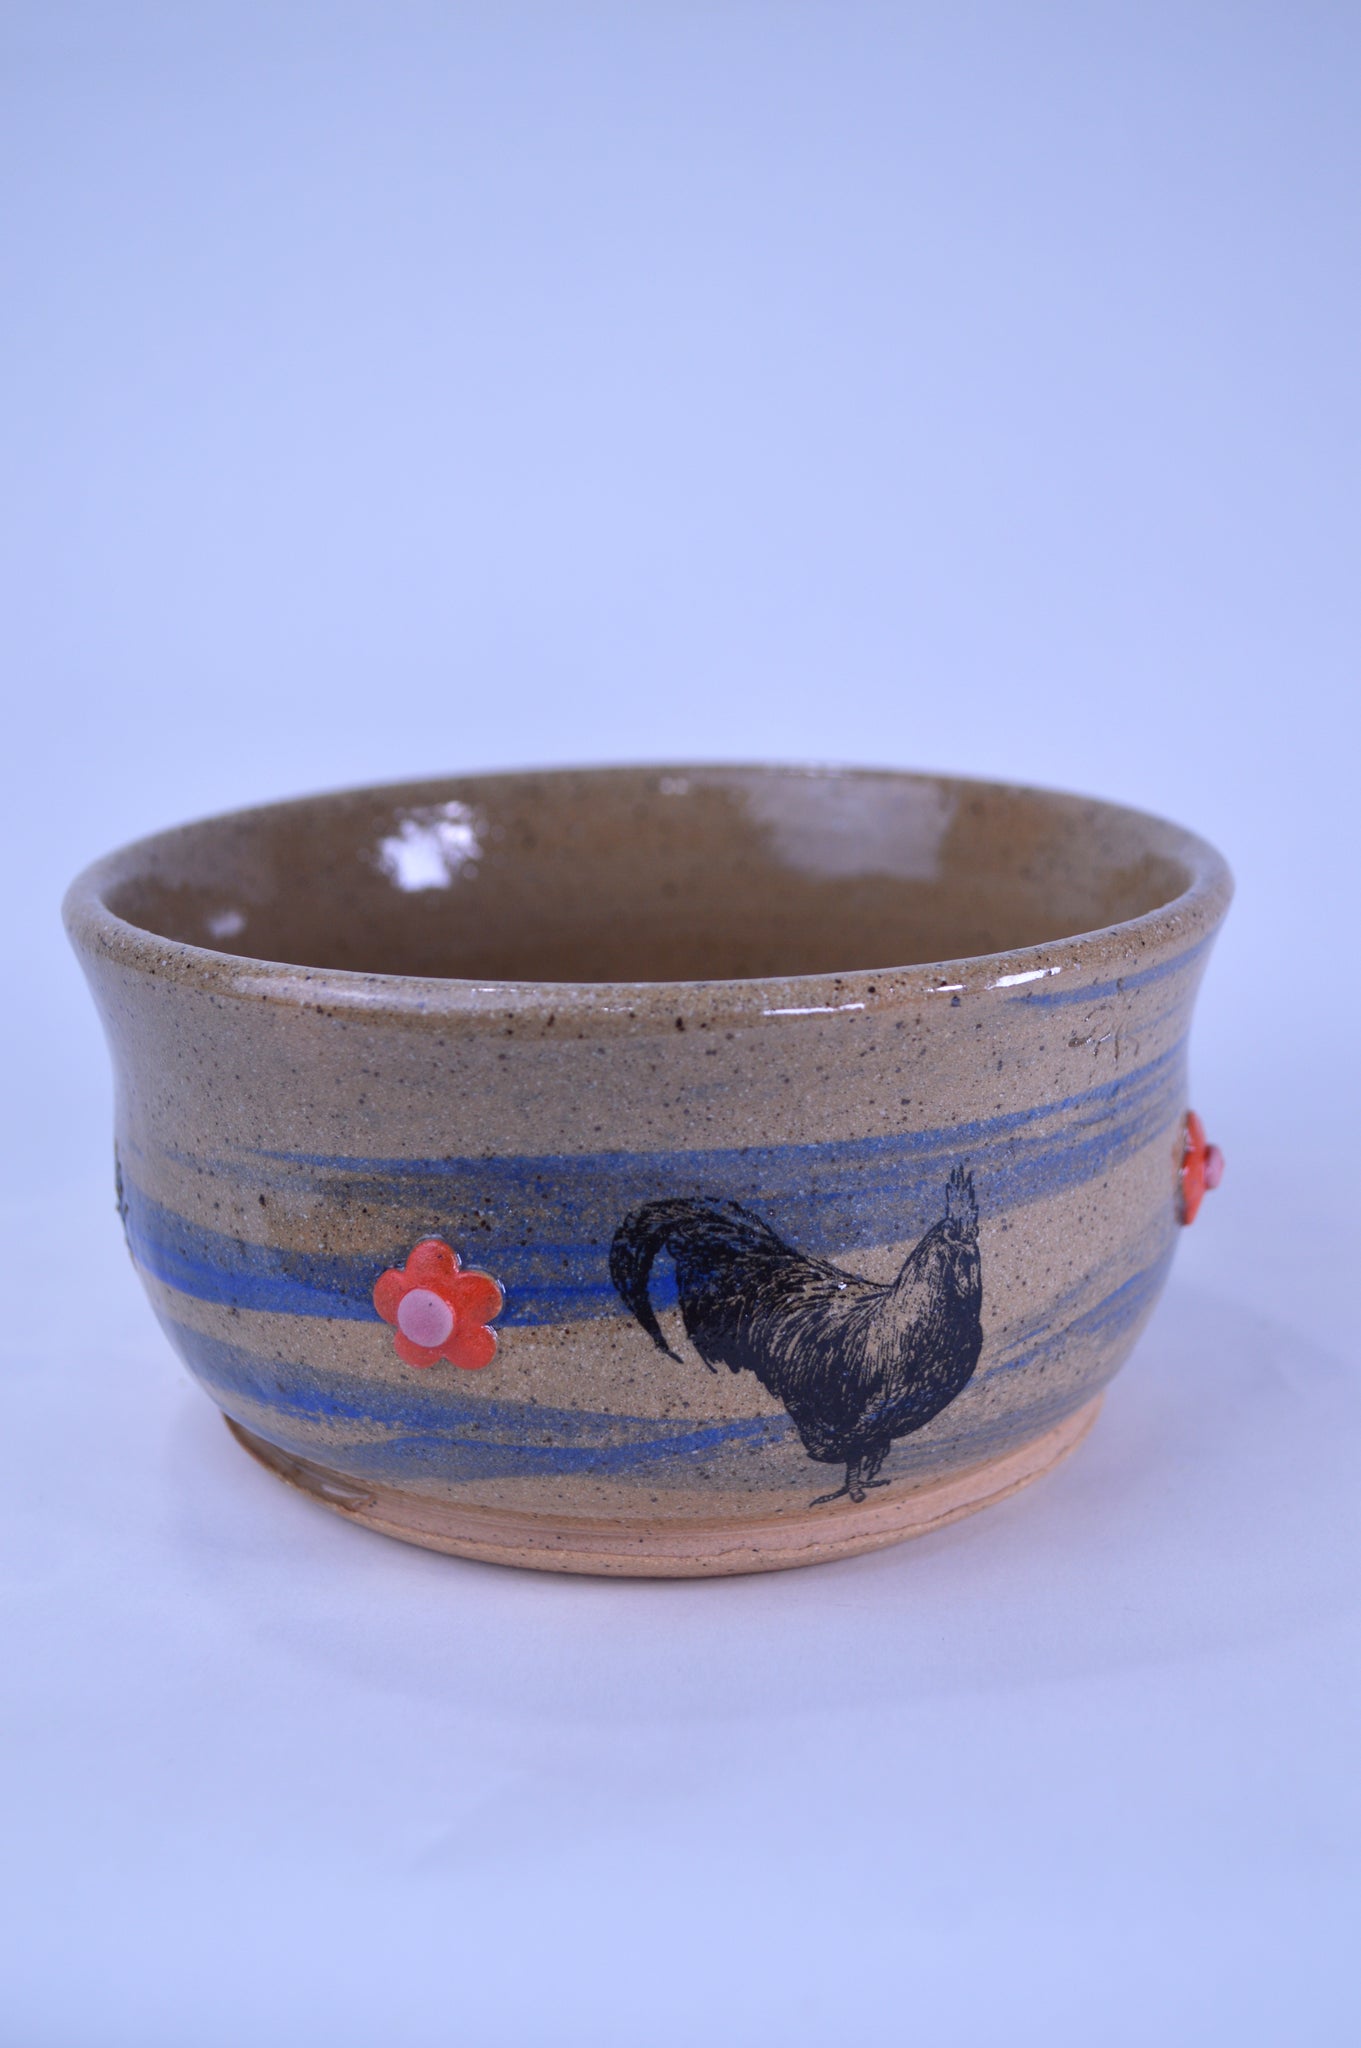 Daisy Bowl with Chickens